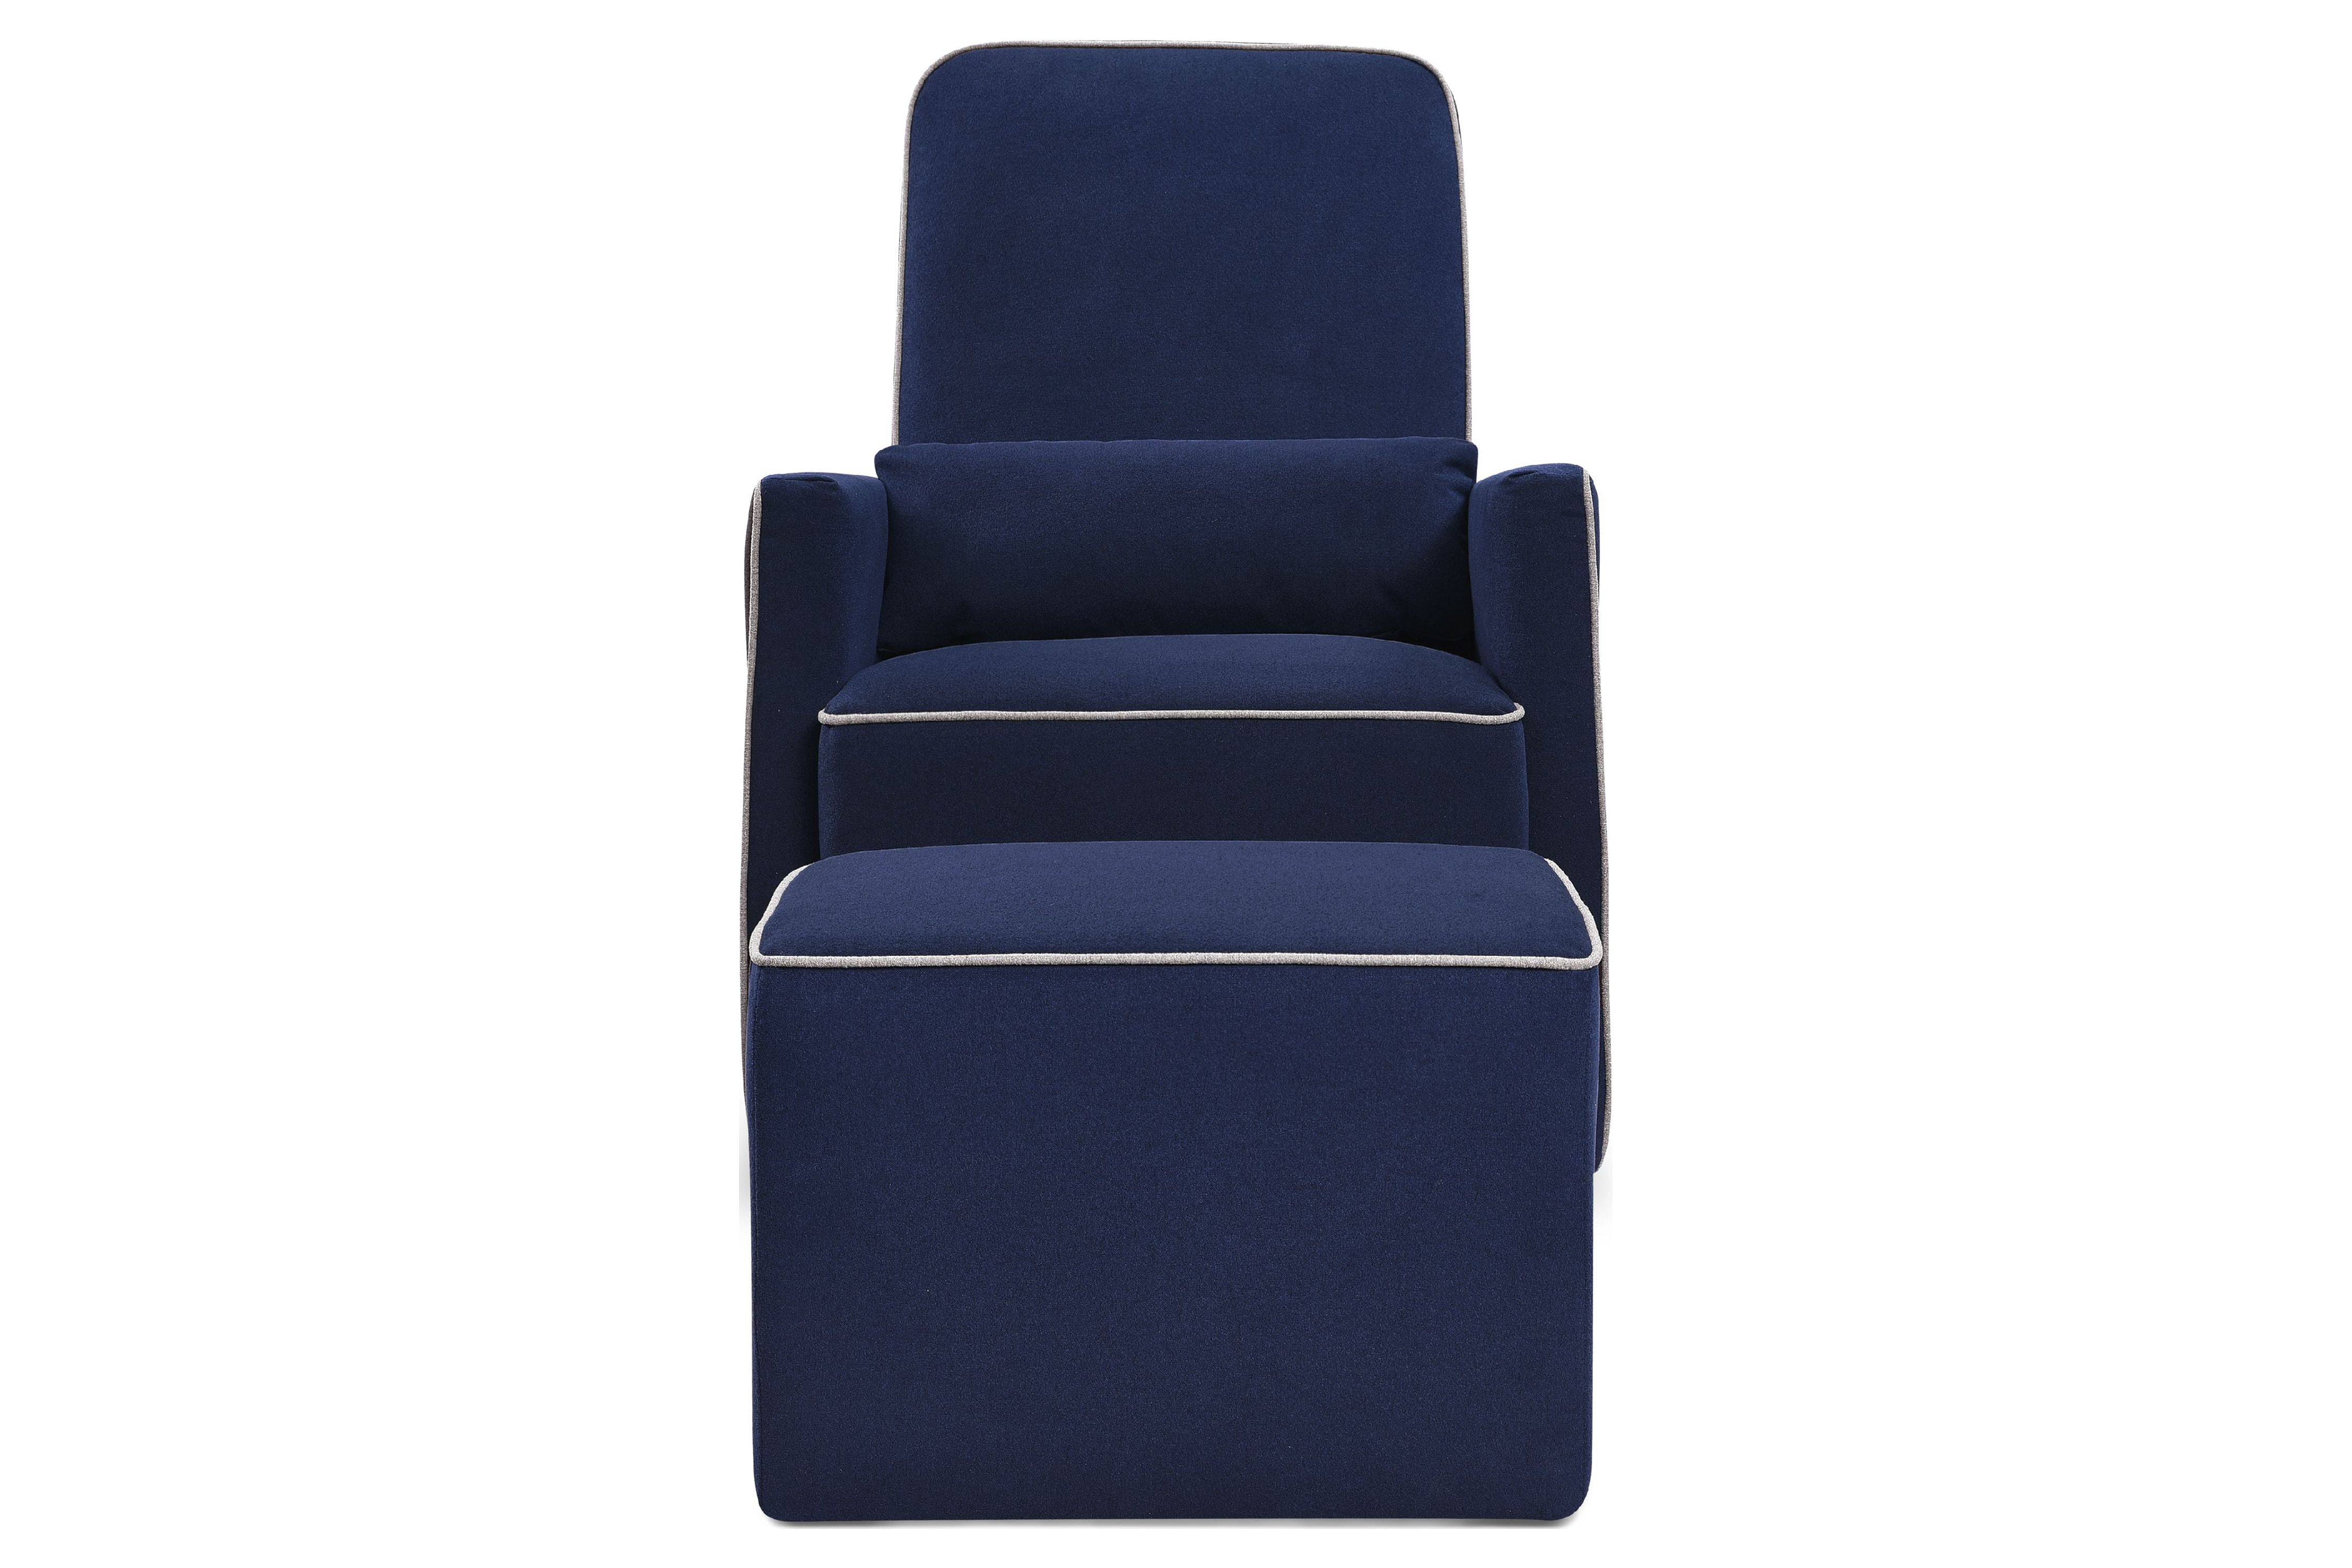 DaVinci Baby Olive Glider and Ottoman, Navy and Grey - image 5 of 10